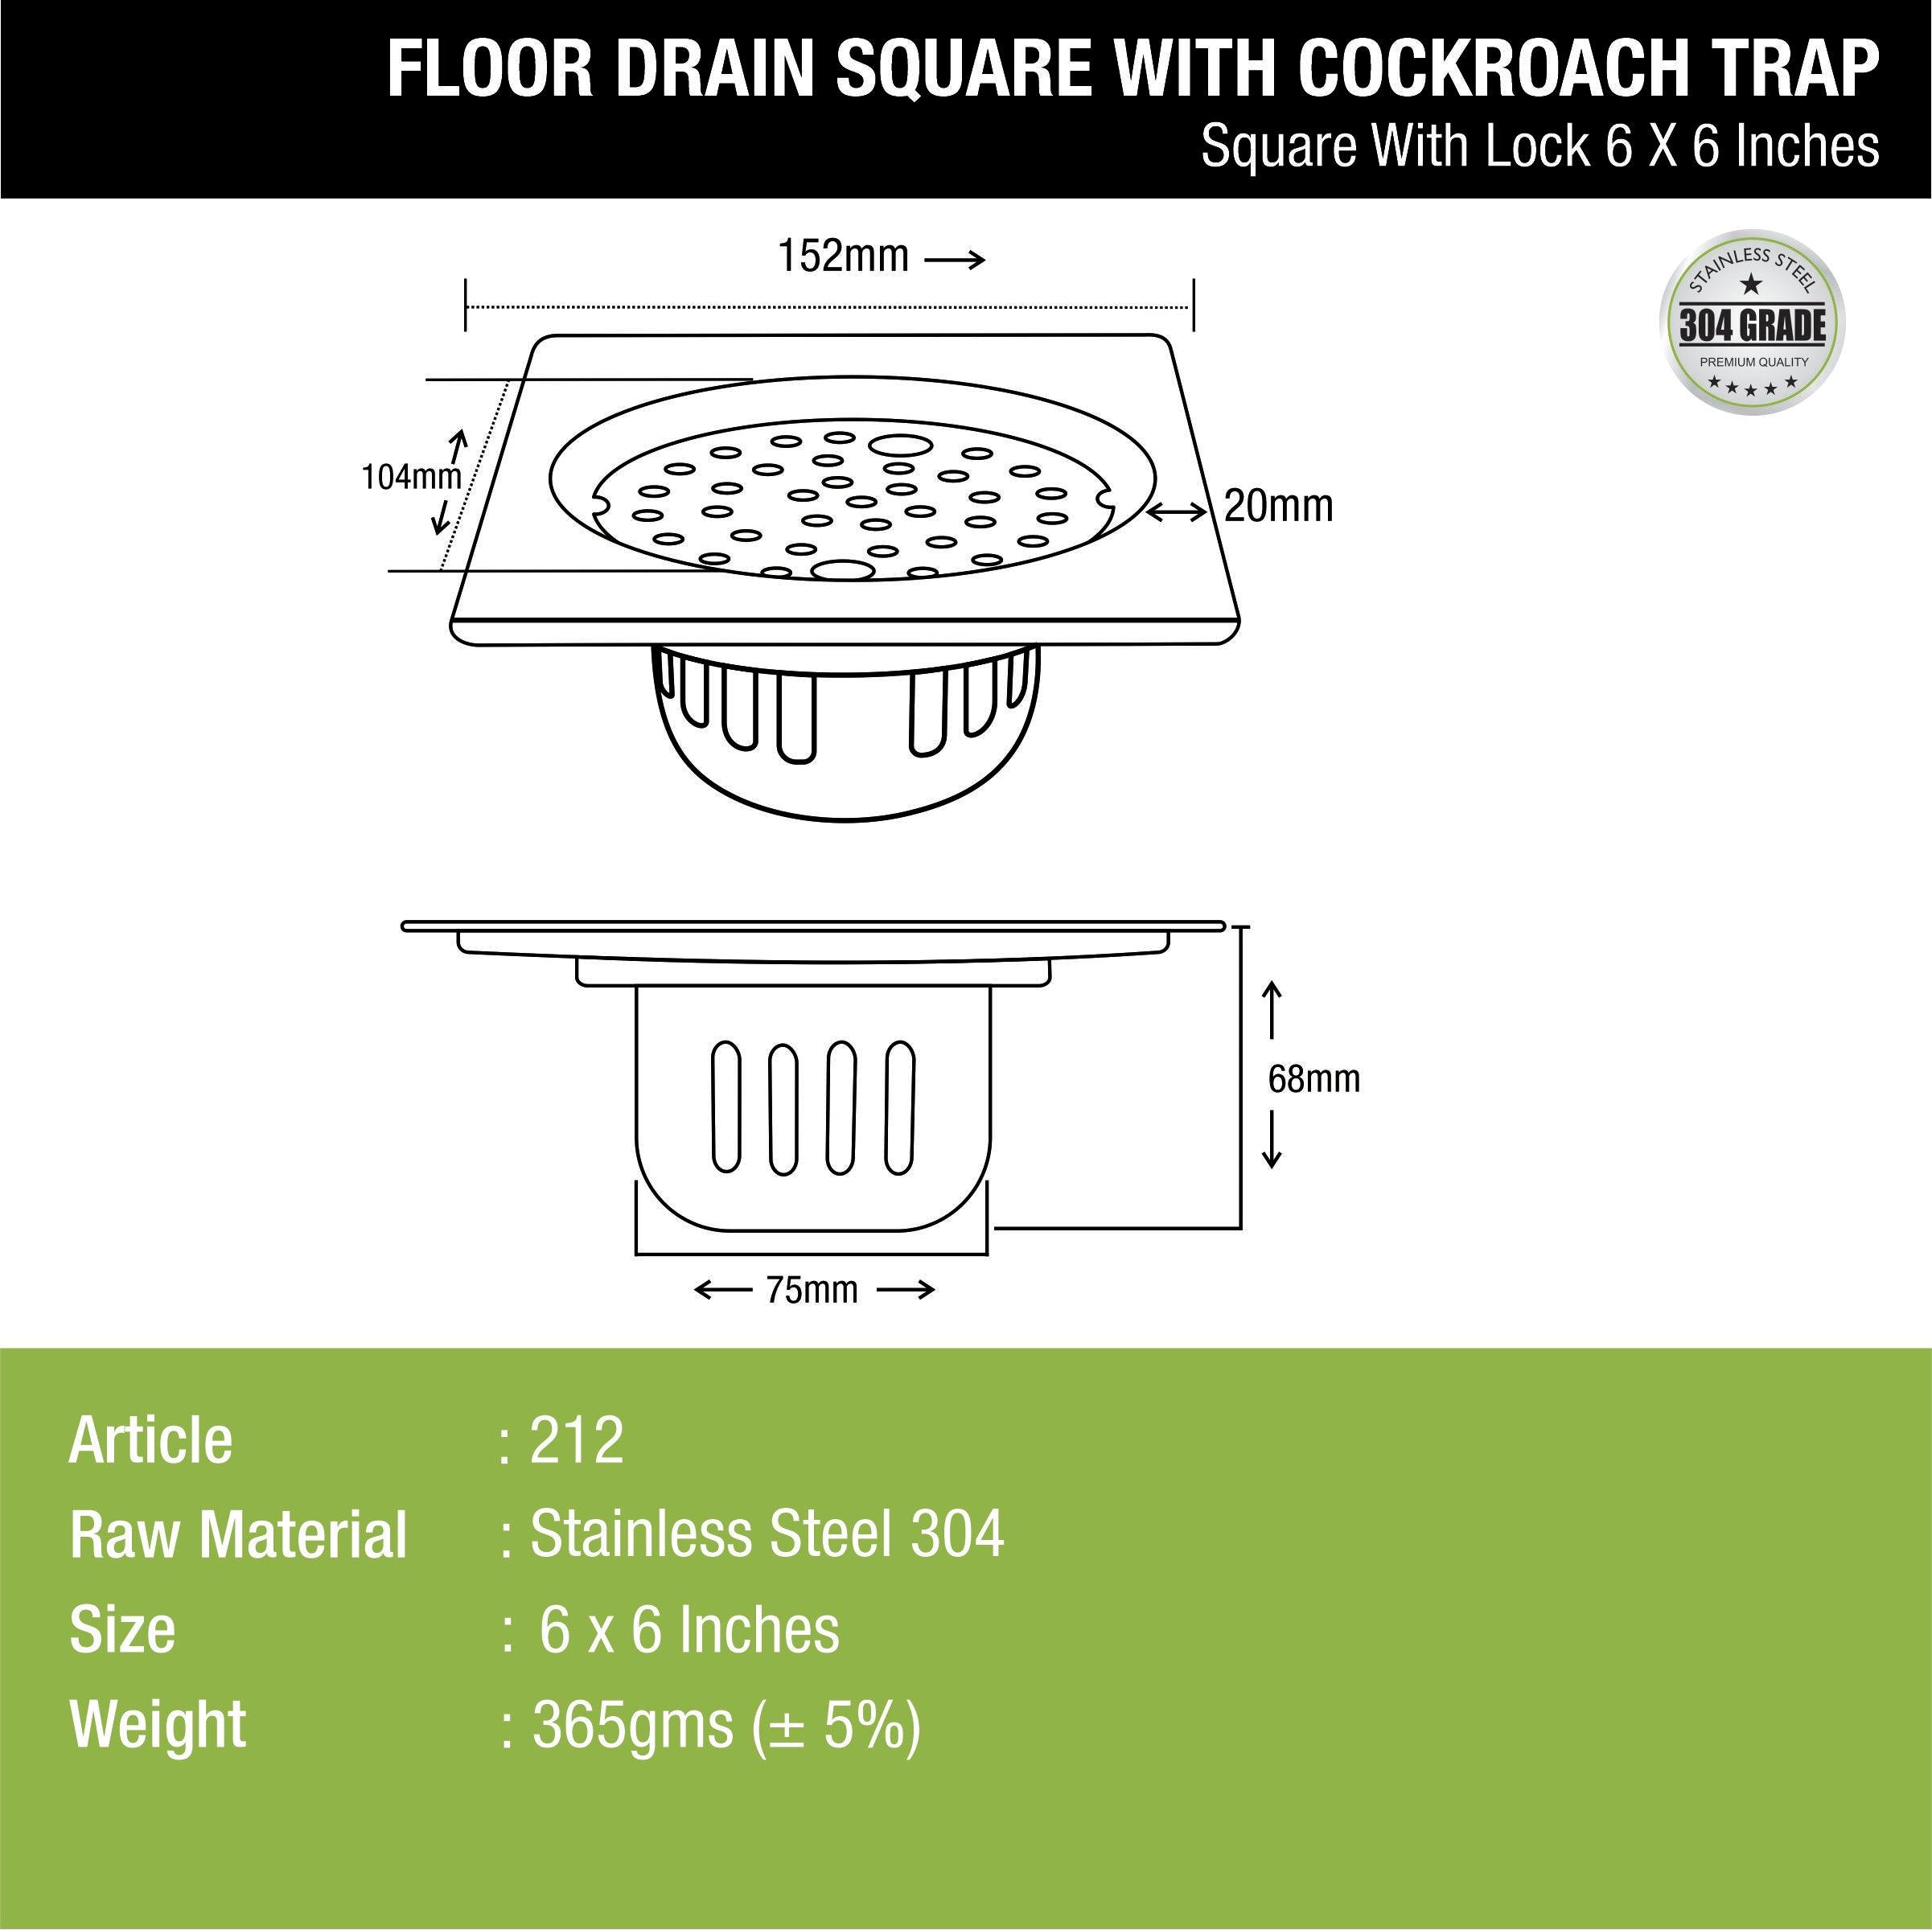 Square Floor Drain (6 x 6 Inches) with Lock and Cockroach Trap - LIPKA - Lipka Home